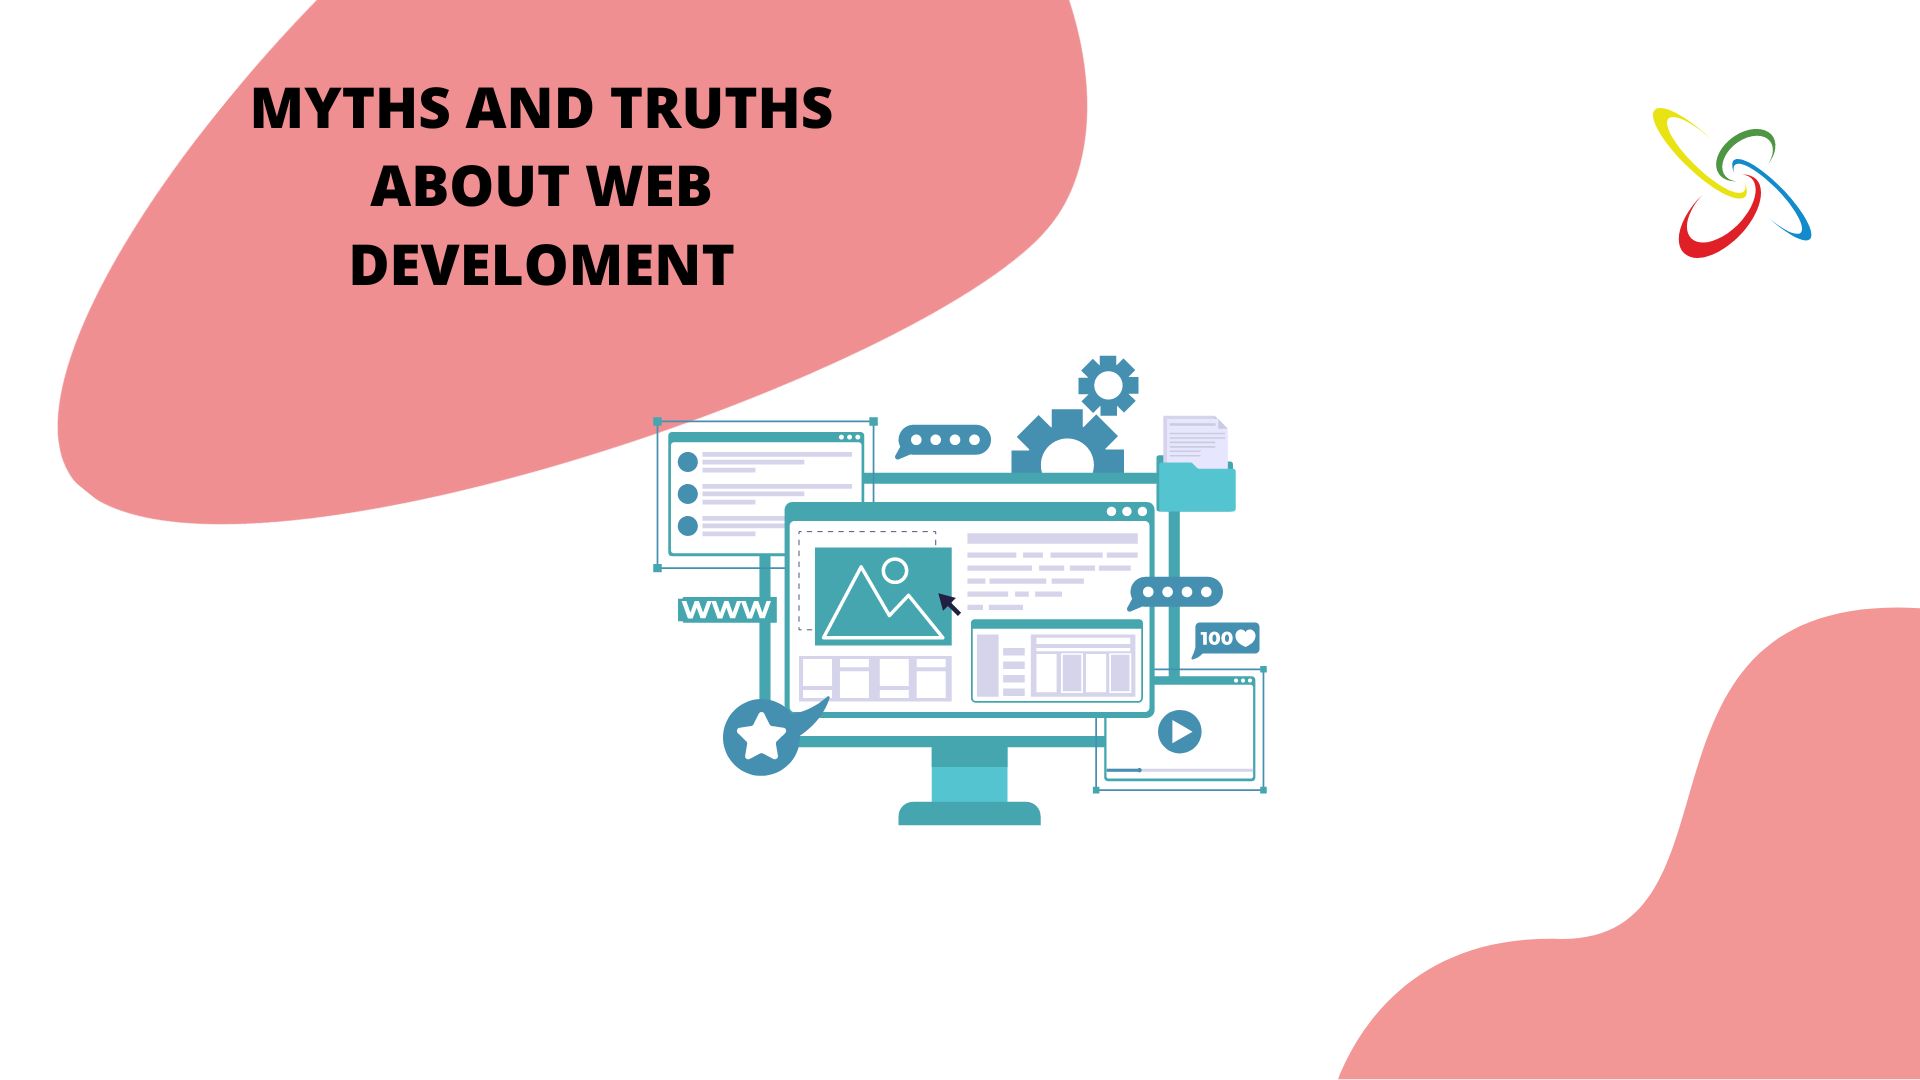 Myths and truths about web develoment